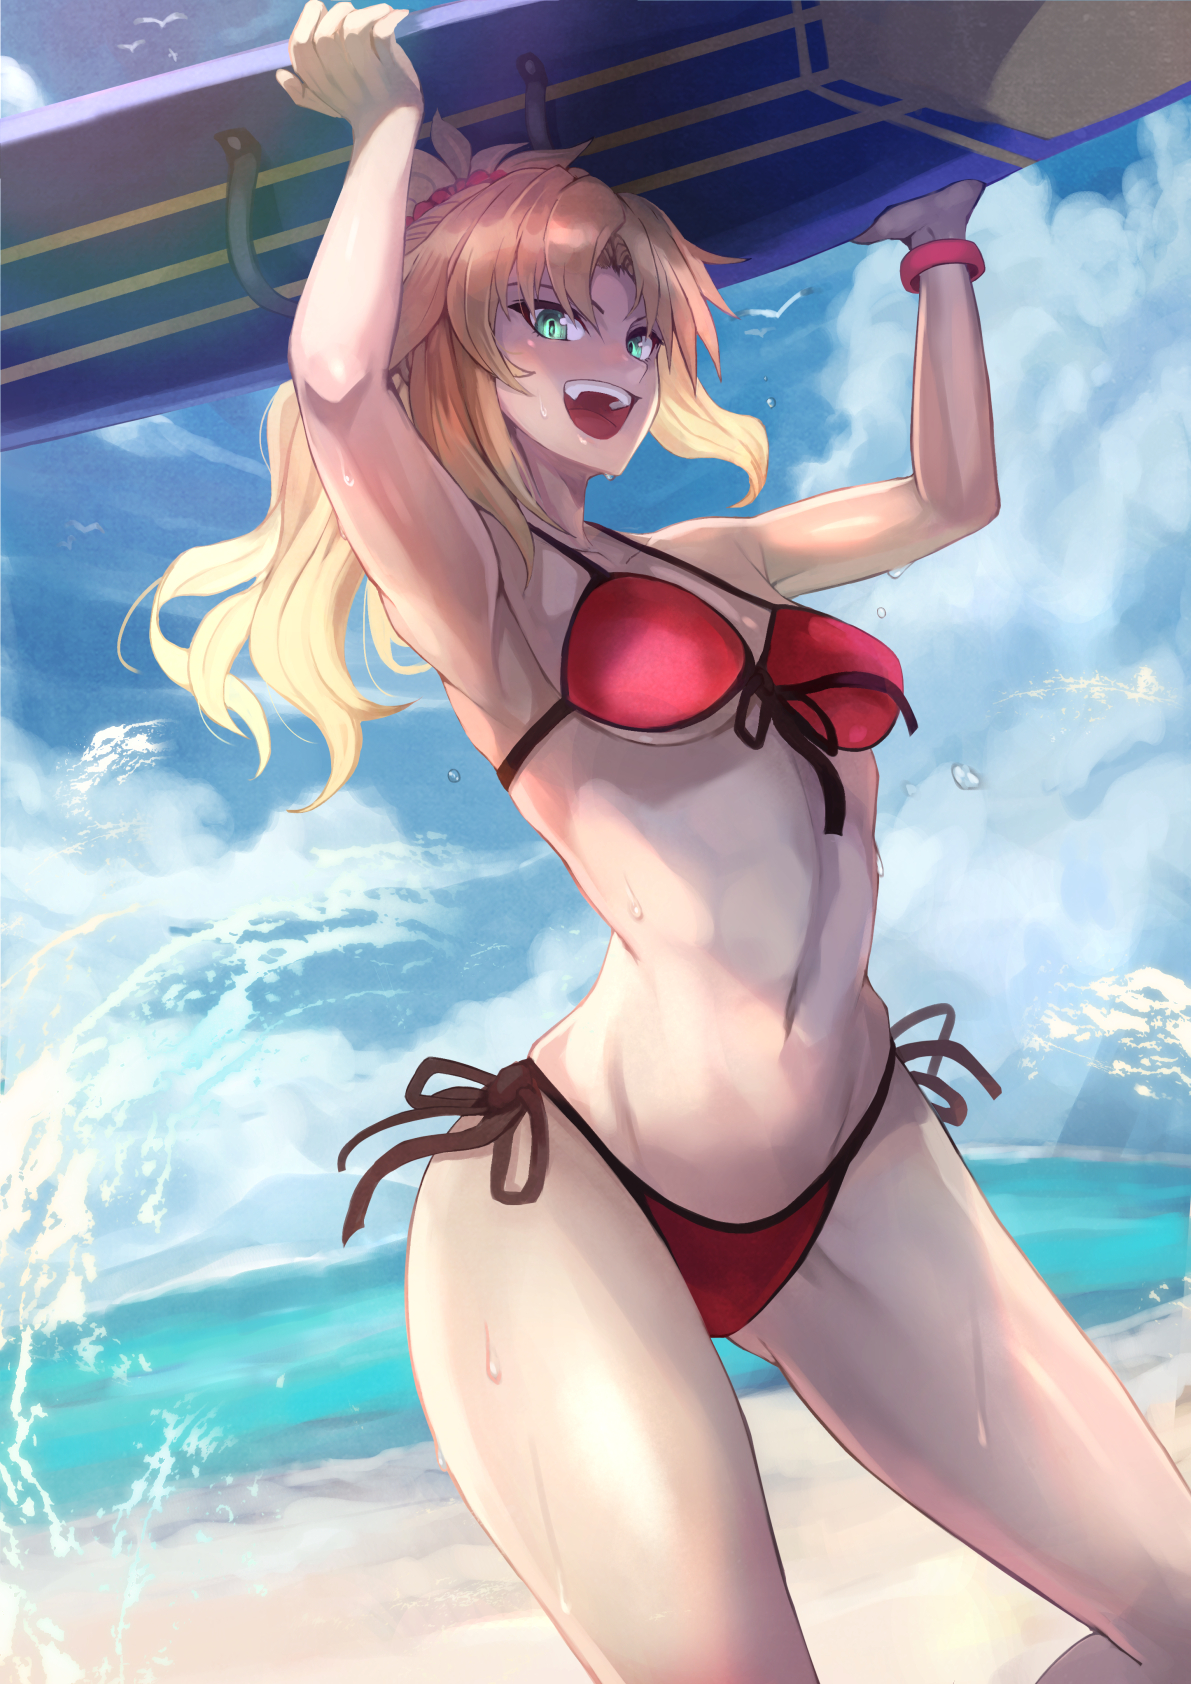 Anime 1191x1684 anime anime girls digital art artwork portrait display 2D boobs bikini beach blonde green eyes open mouth Ohako Fate series Fate/Grand Order Mordred (Fate/Apocrypha) arms up armpits looking at viewer